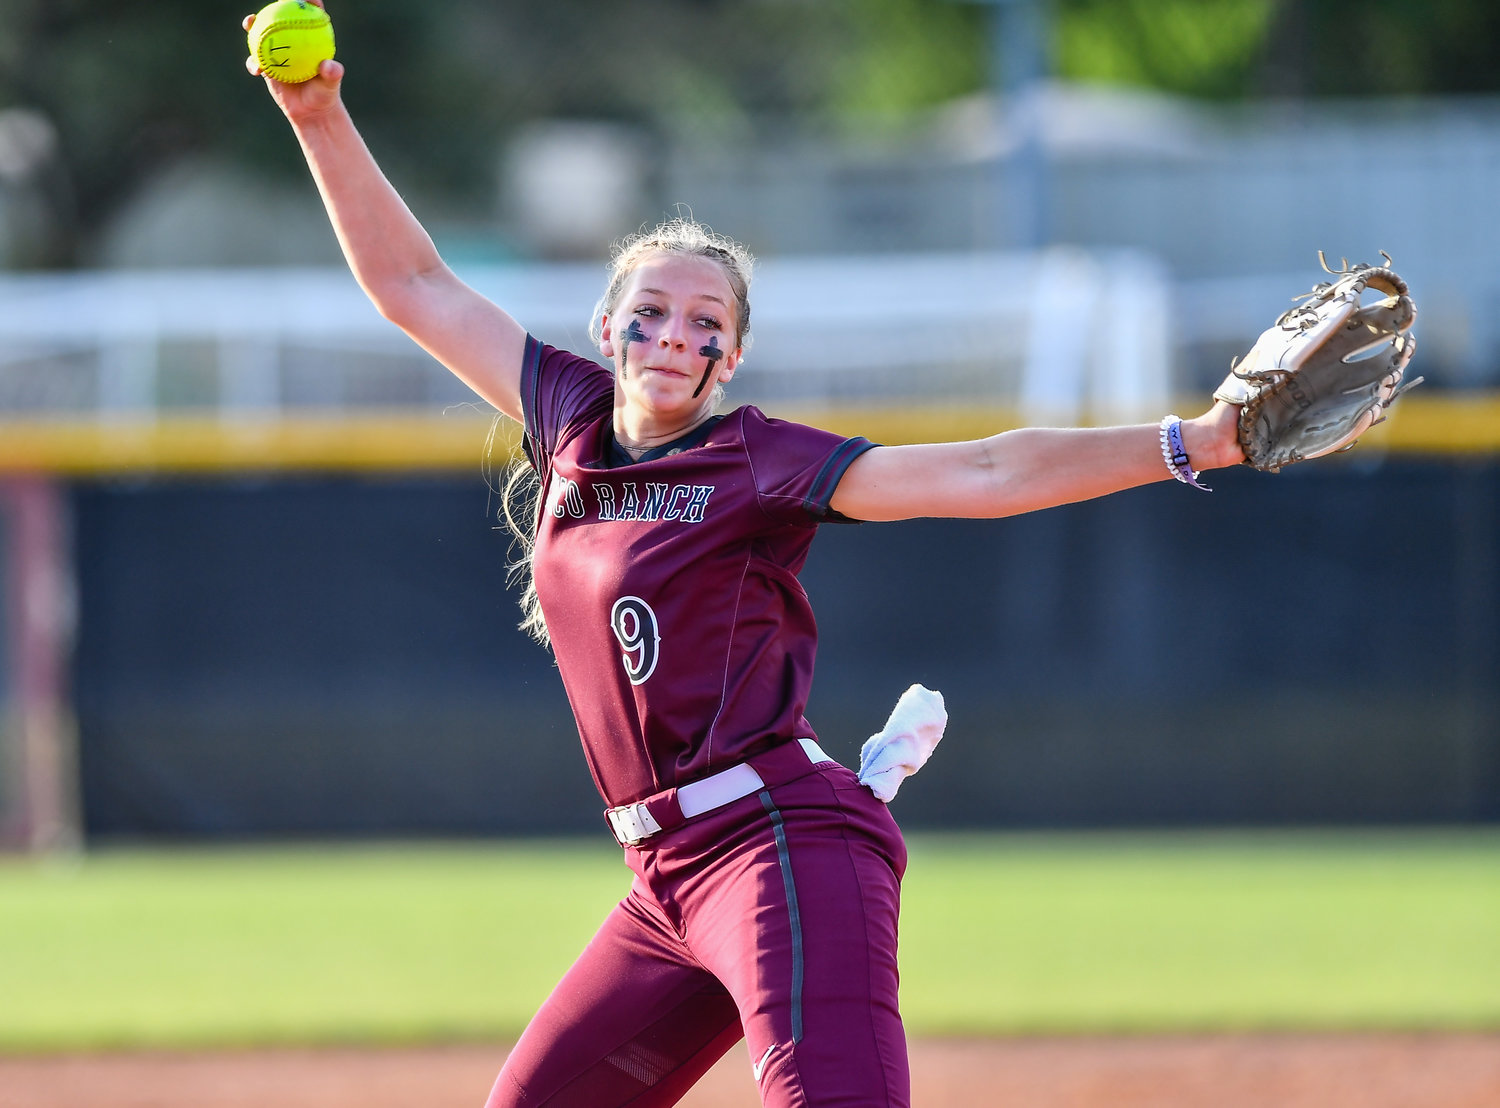 May 13, 2022: Cinco Ranch's pitcher Chela Kovar #9 season is cut short as the Cougars fall during the Regional Quarterfinal playoff between Katy and Cinco Ranch at Katy HS. (Photo by Mark Goodman / Katy Times)